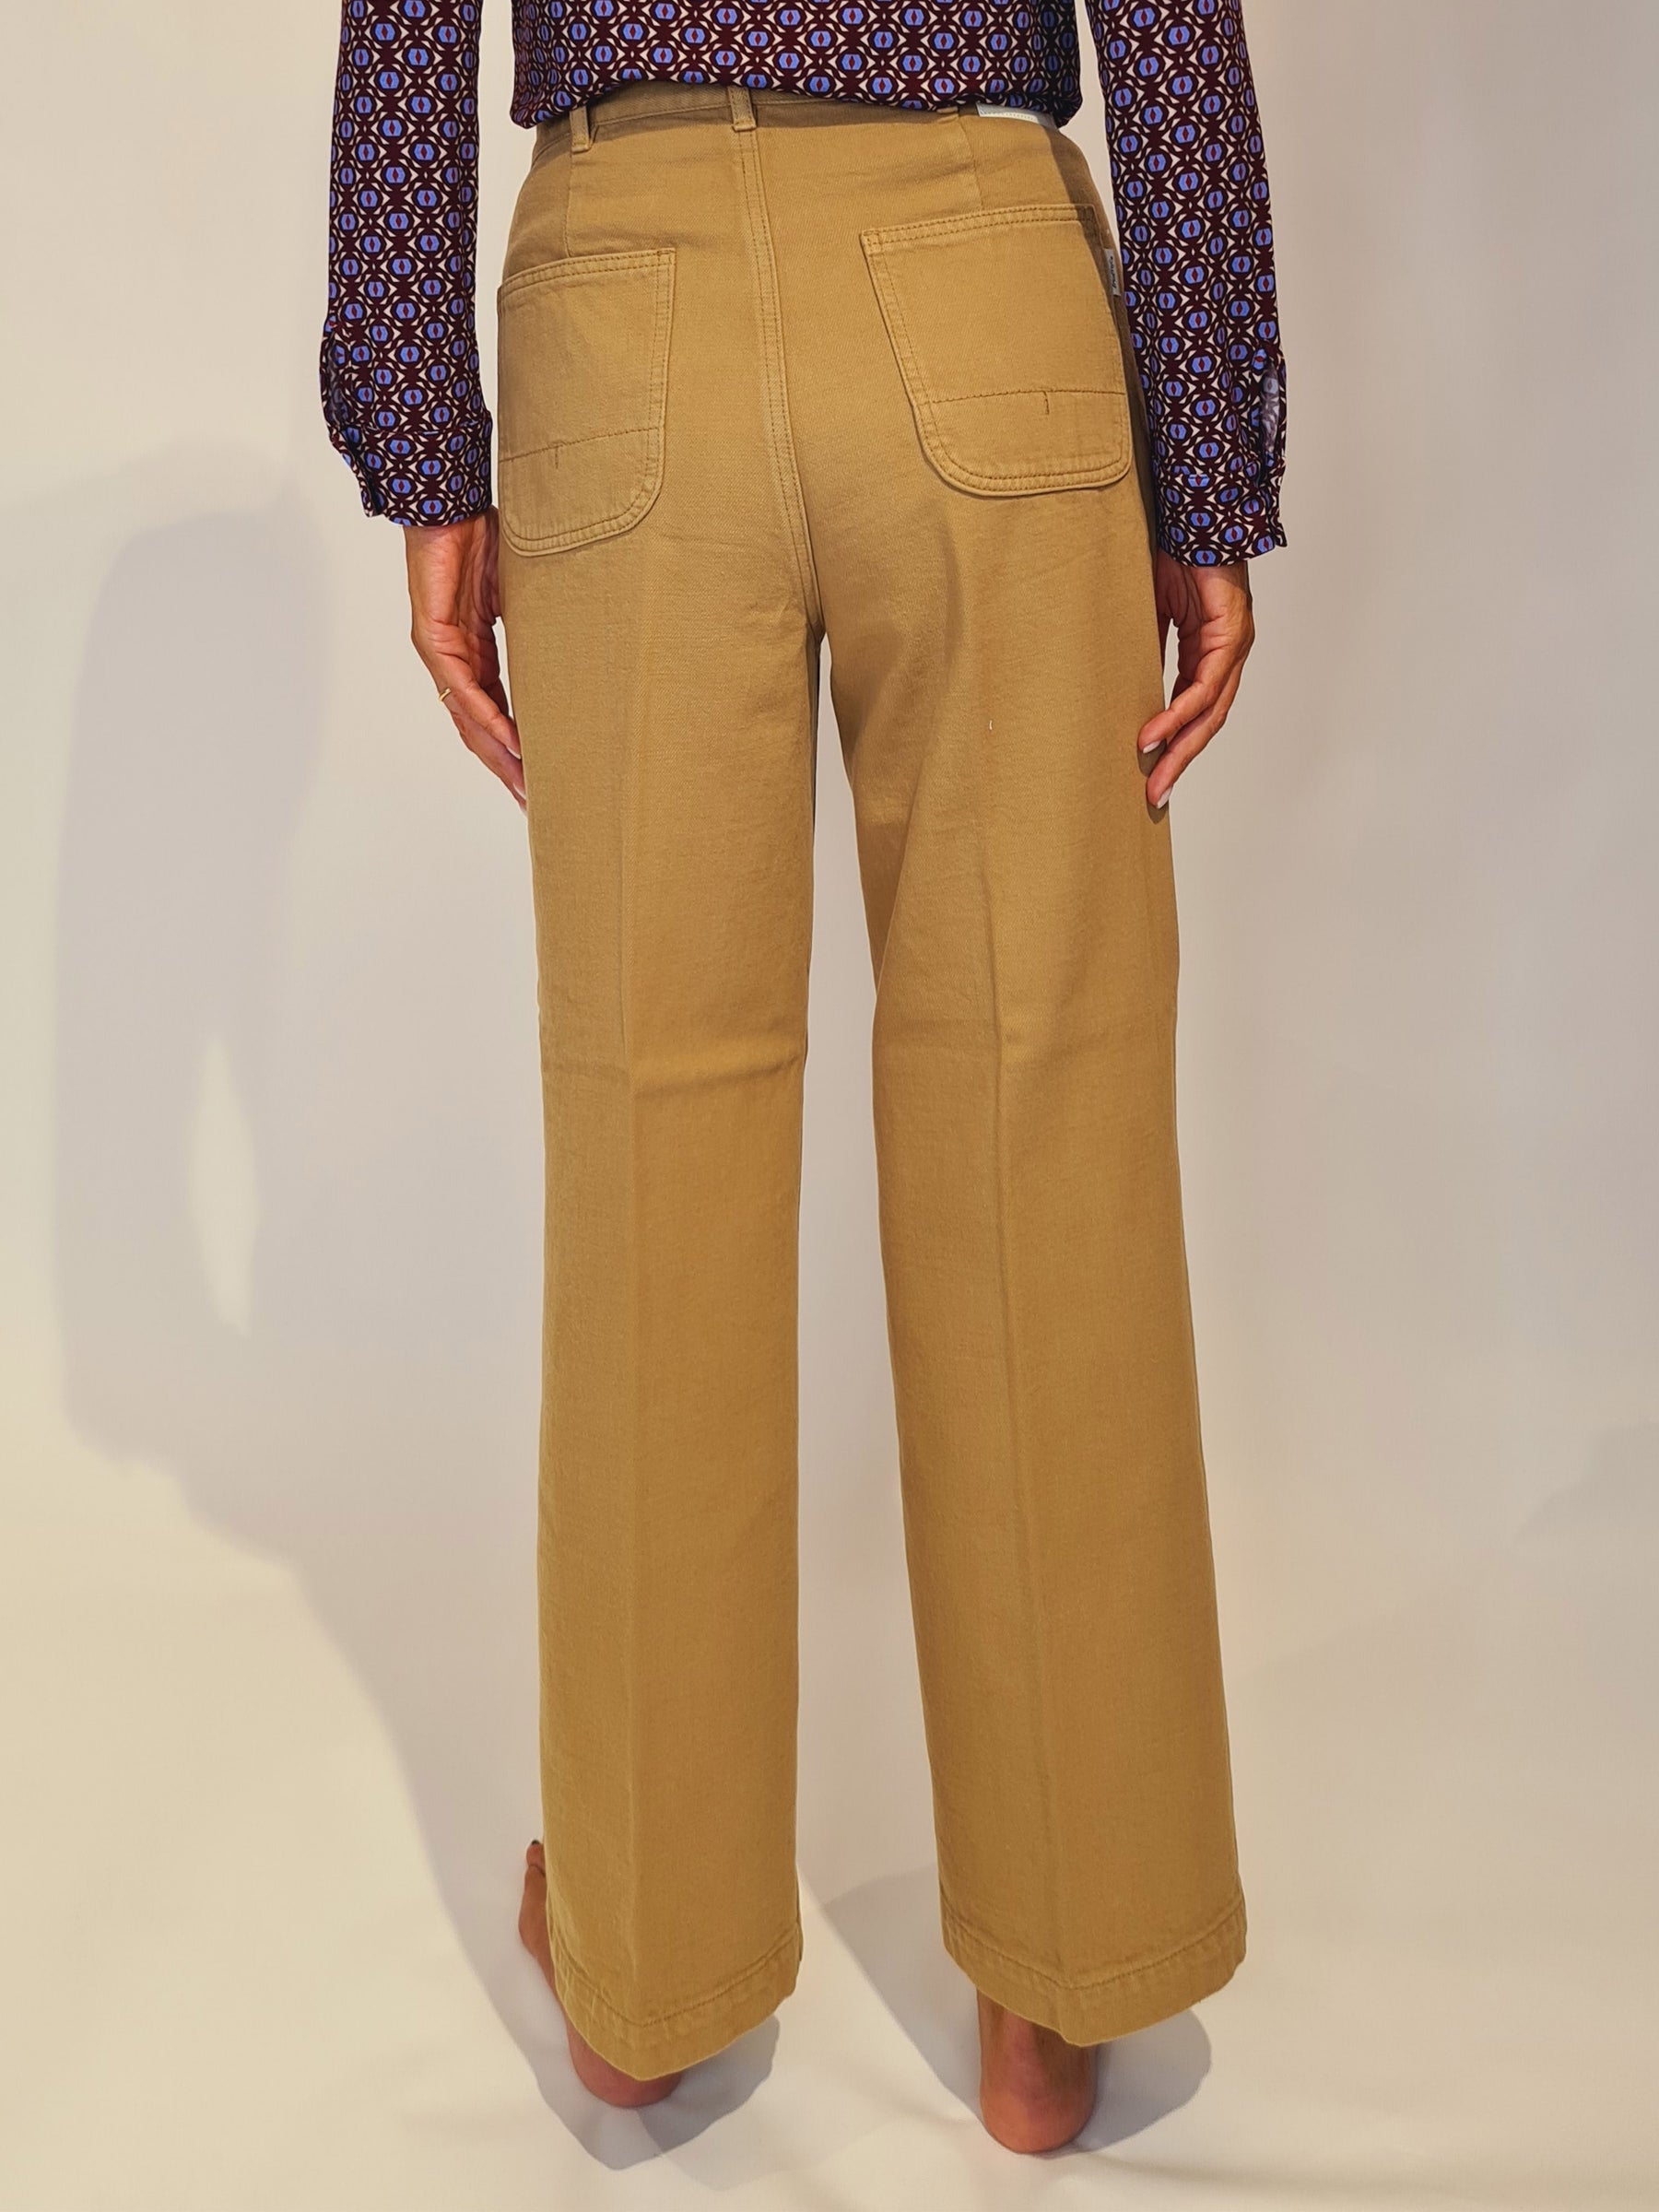 Sally True NYC trousers